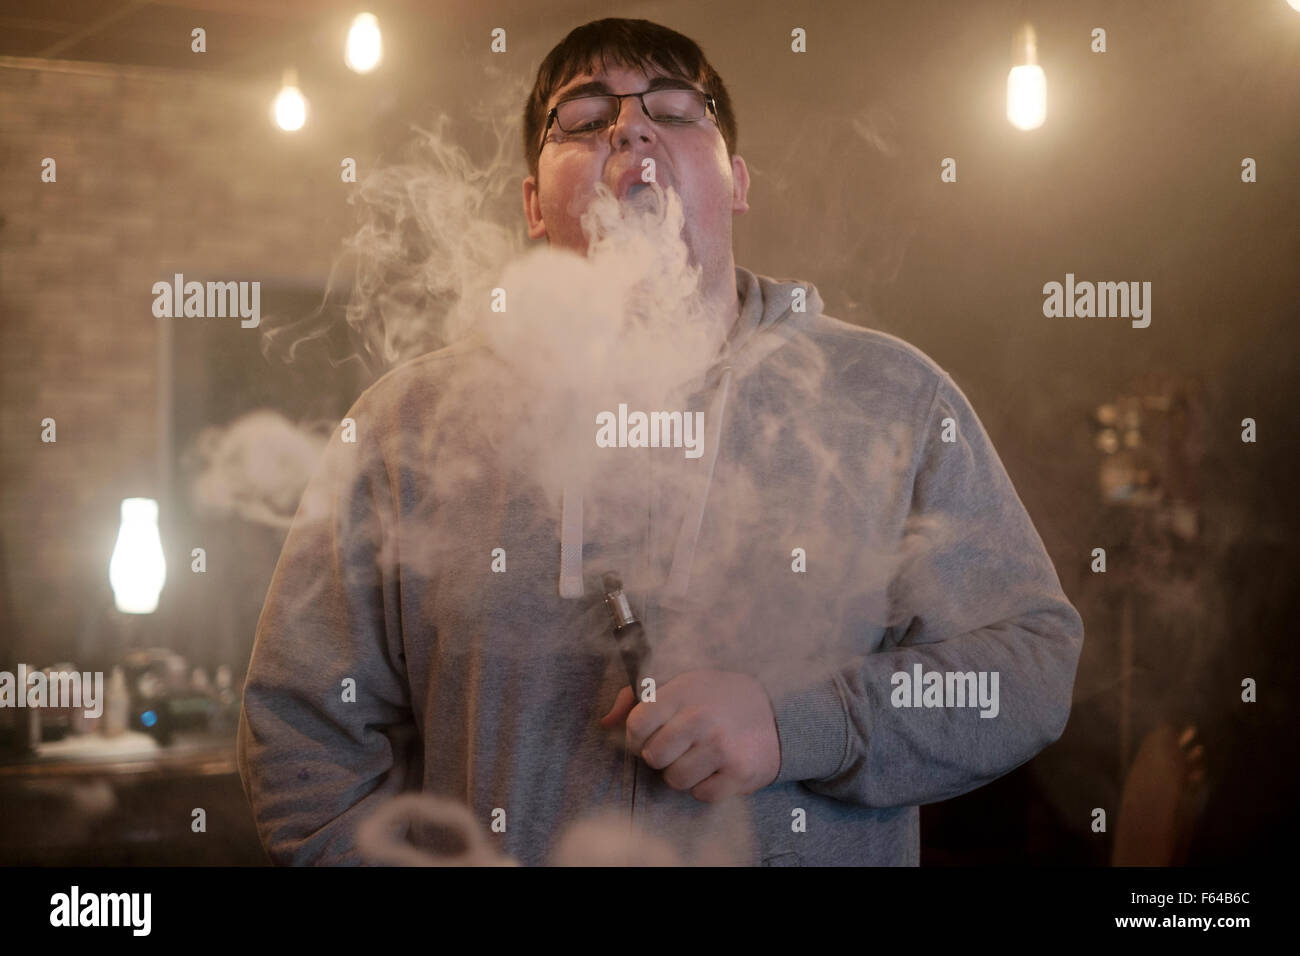 man blows billowing clouds of vapour while vaping using an electronic device england uk Stock Photo